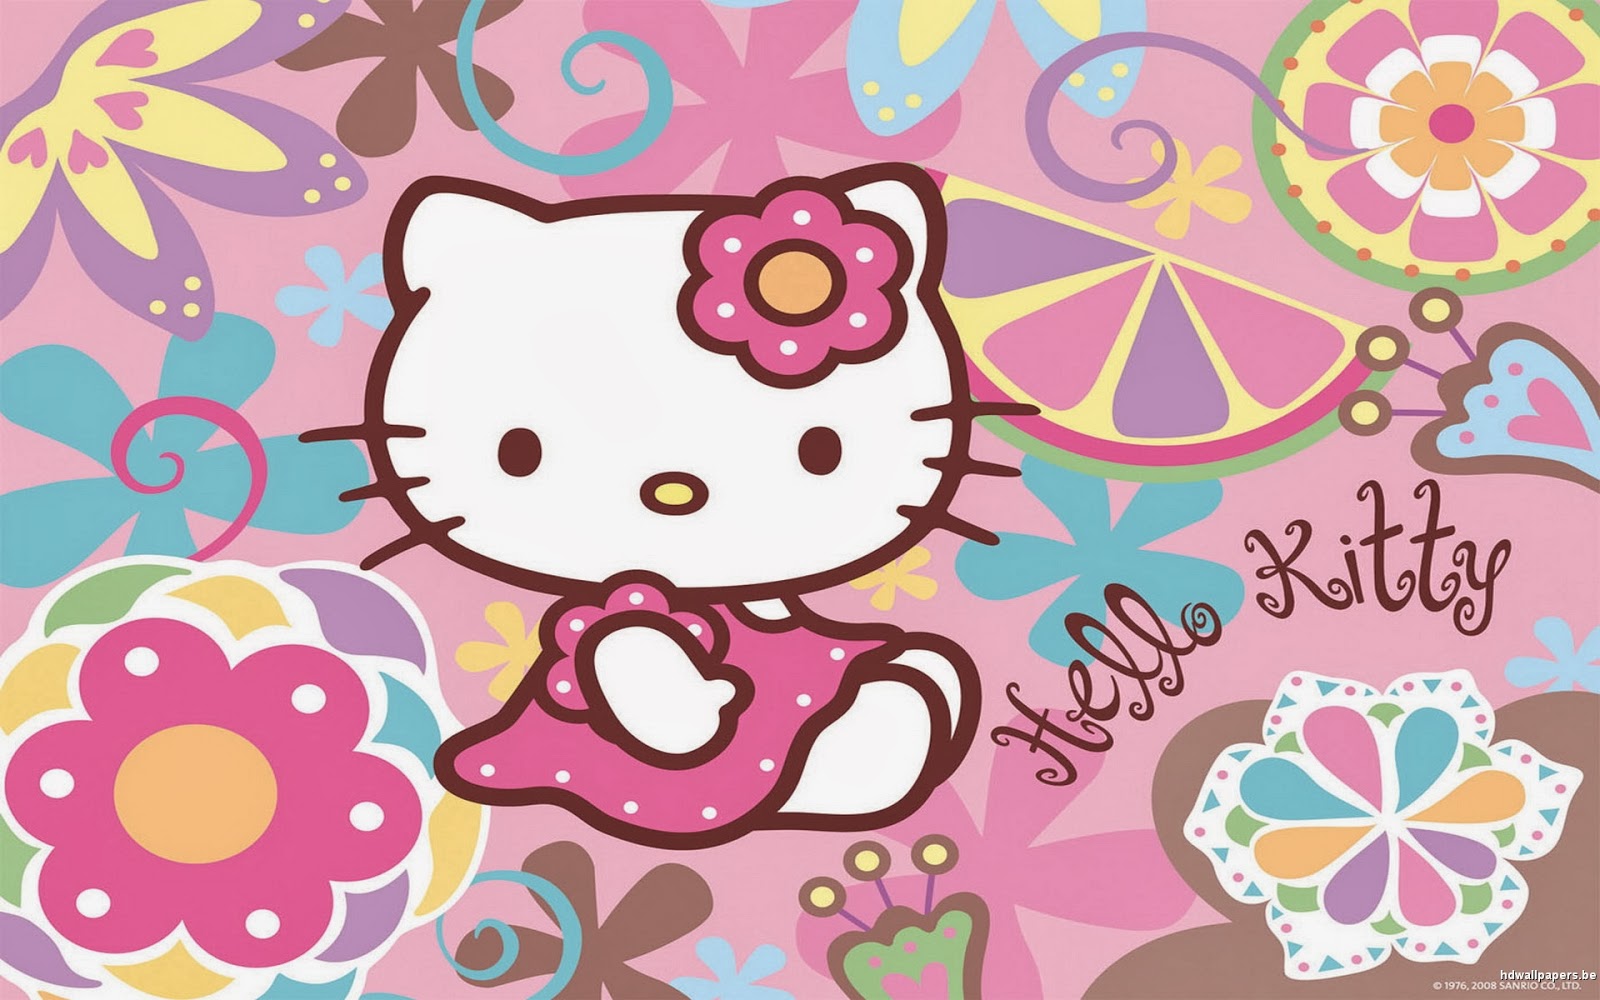  Cute  Hello  Kitty  wallpapers  Beautiful wallpapers  